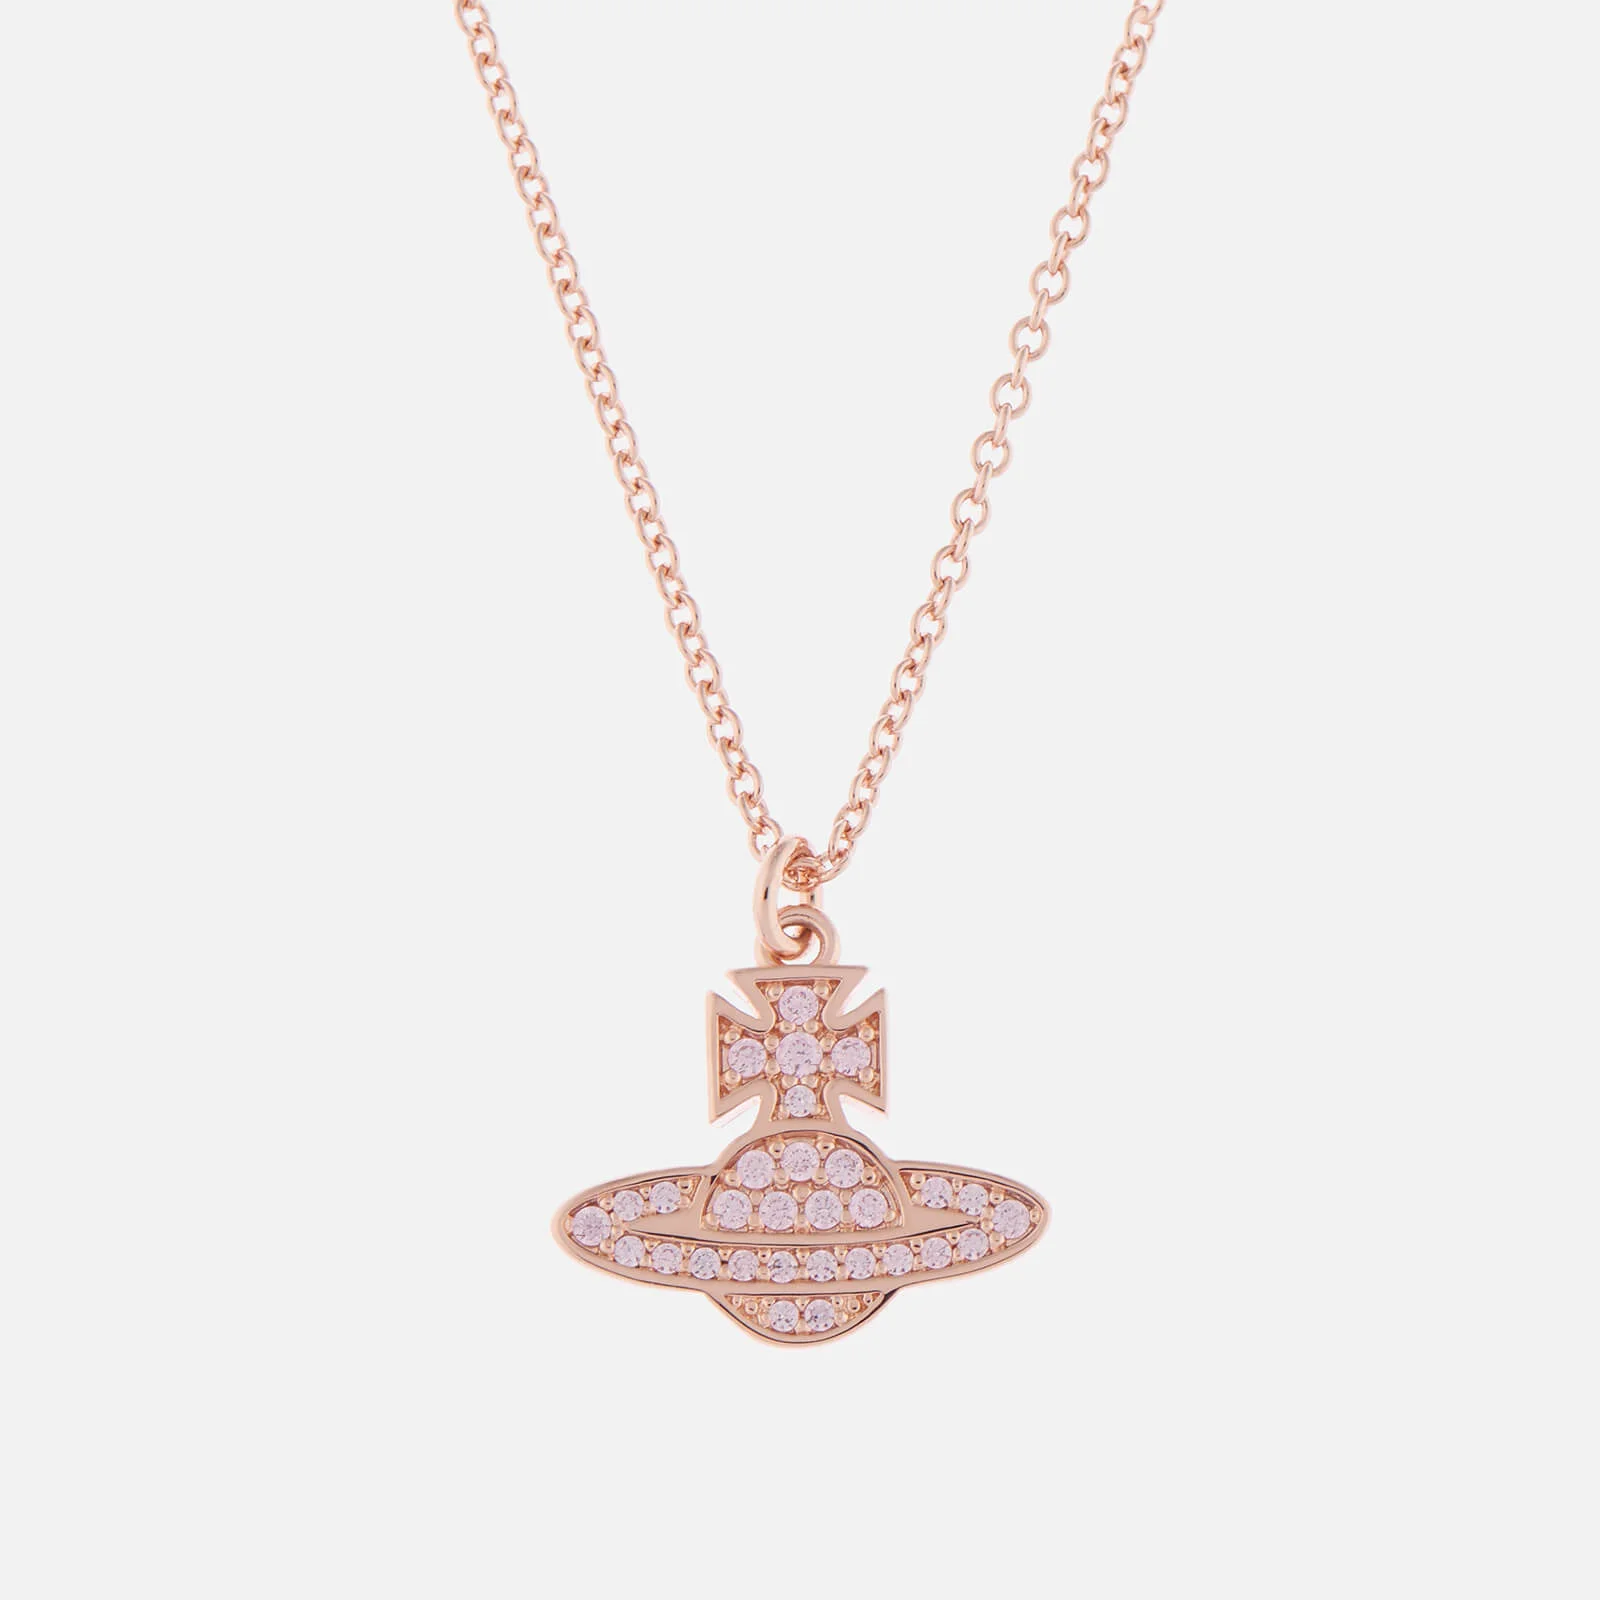 Vivienne Westwood Women's Romina Pave Orb Pendant - Pink Gold Image 1